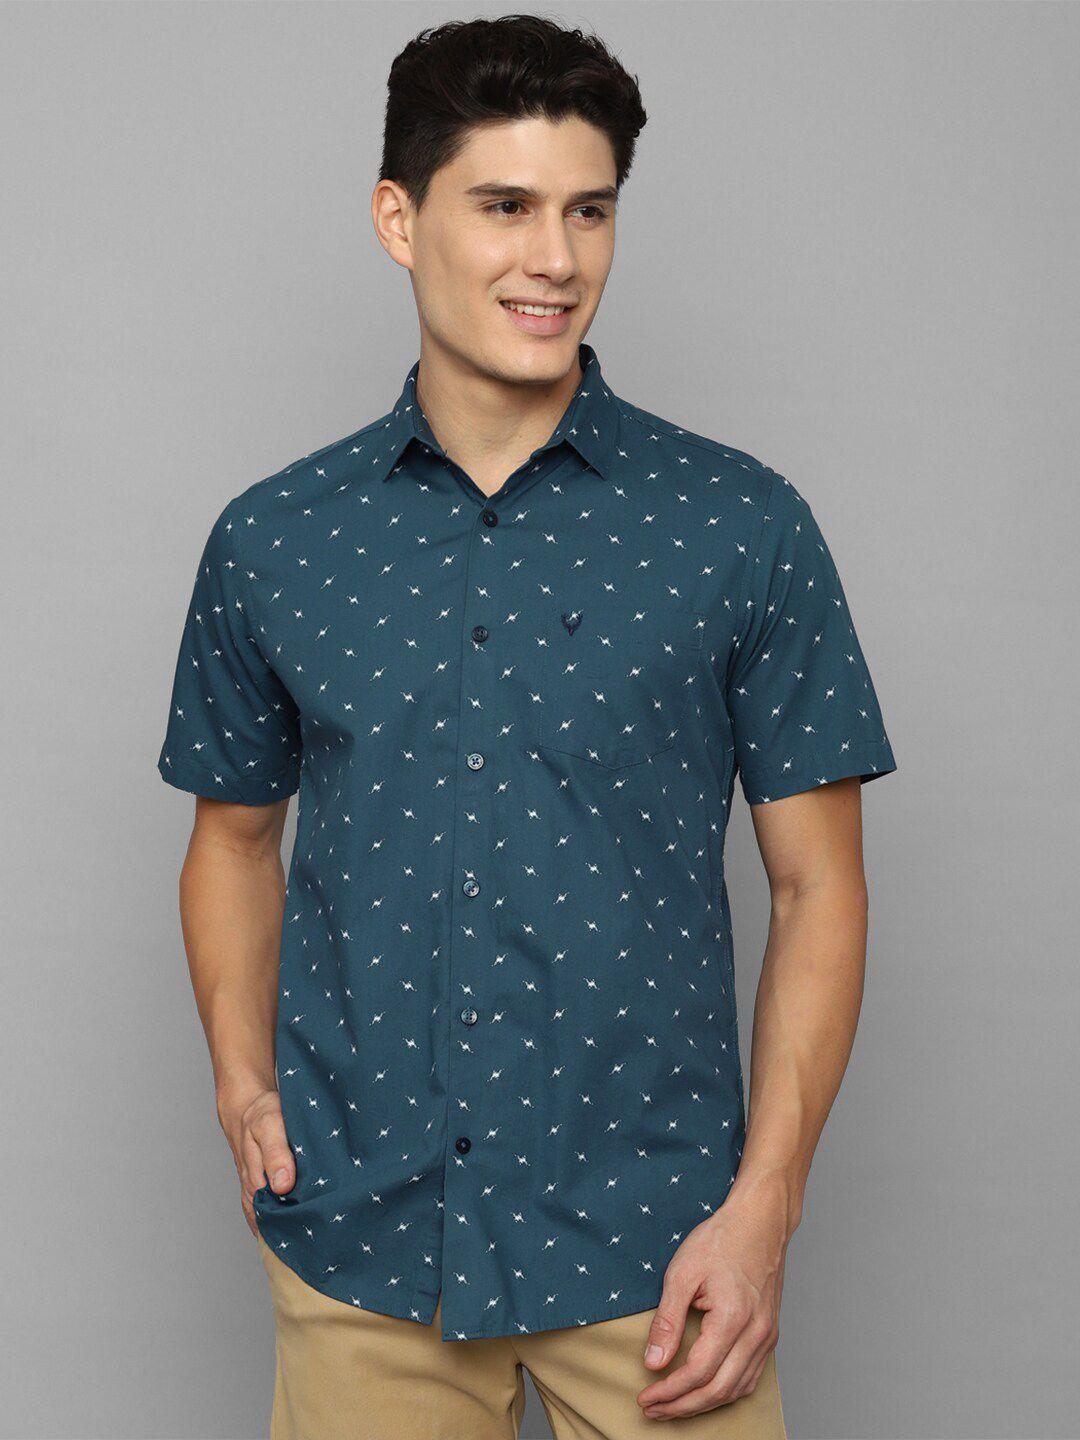 allen solly men slim fit micro ditsy printed casual cotton shirt